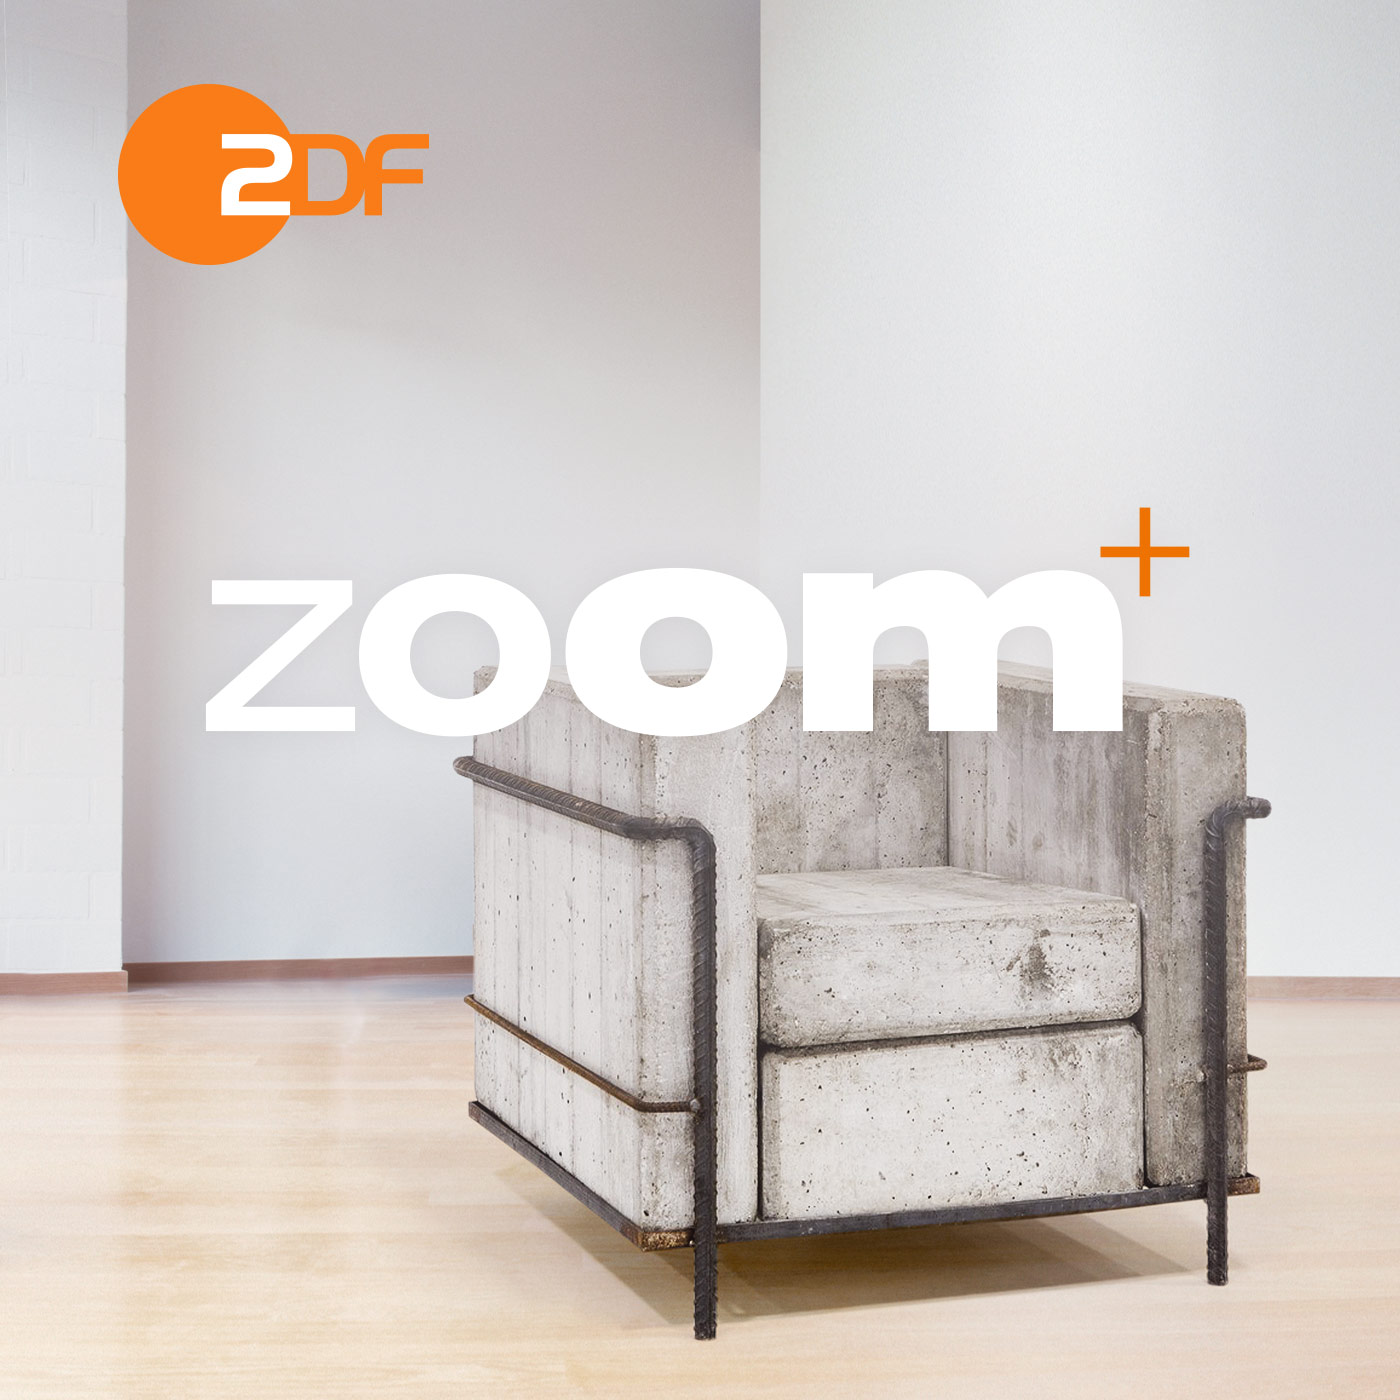 ZDFzoom (VIDEO)